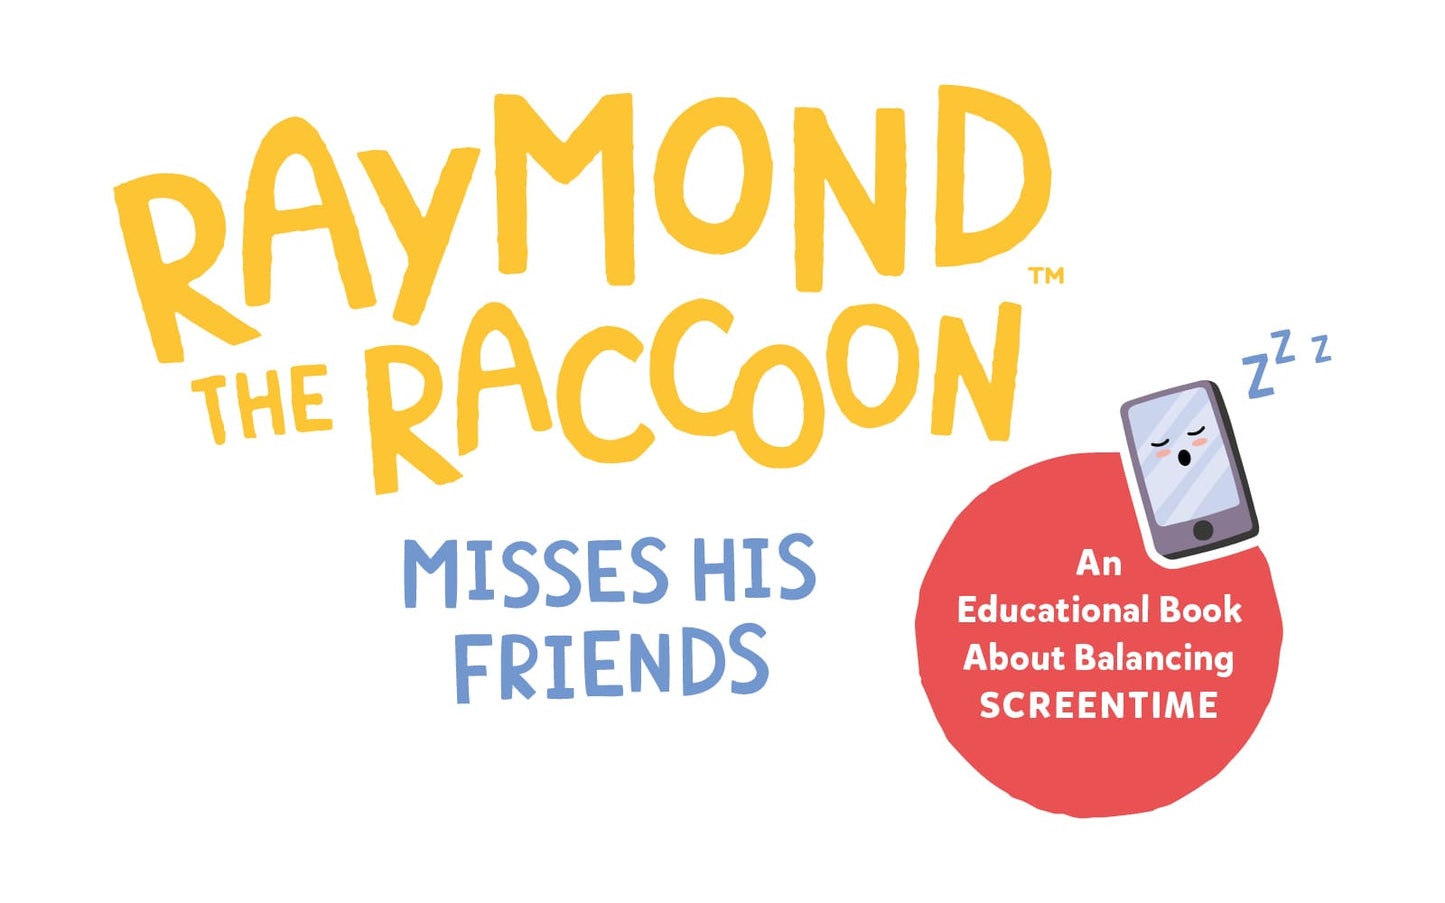 Book | Raymond The Racoon Misses His Friends